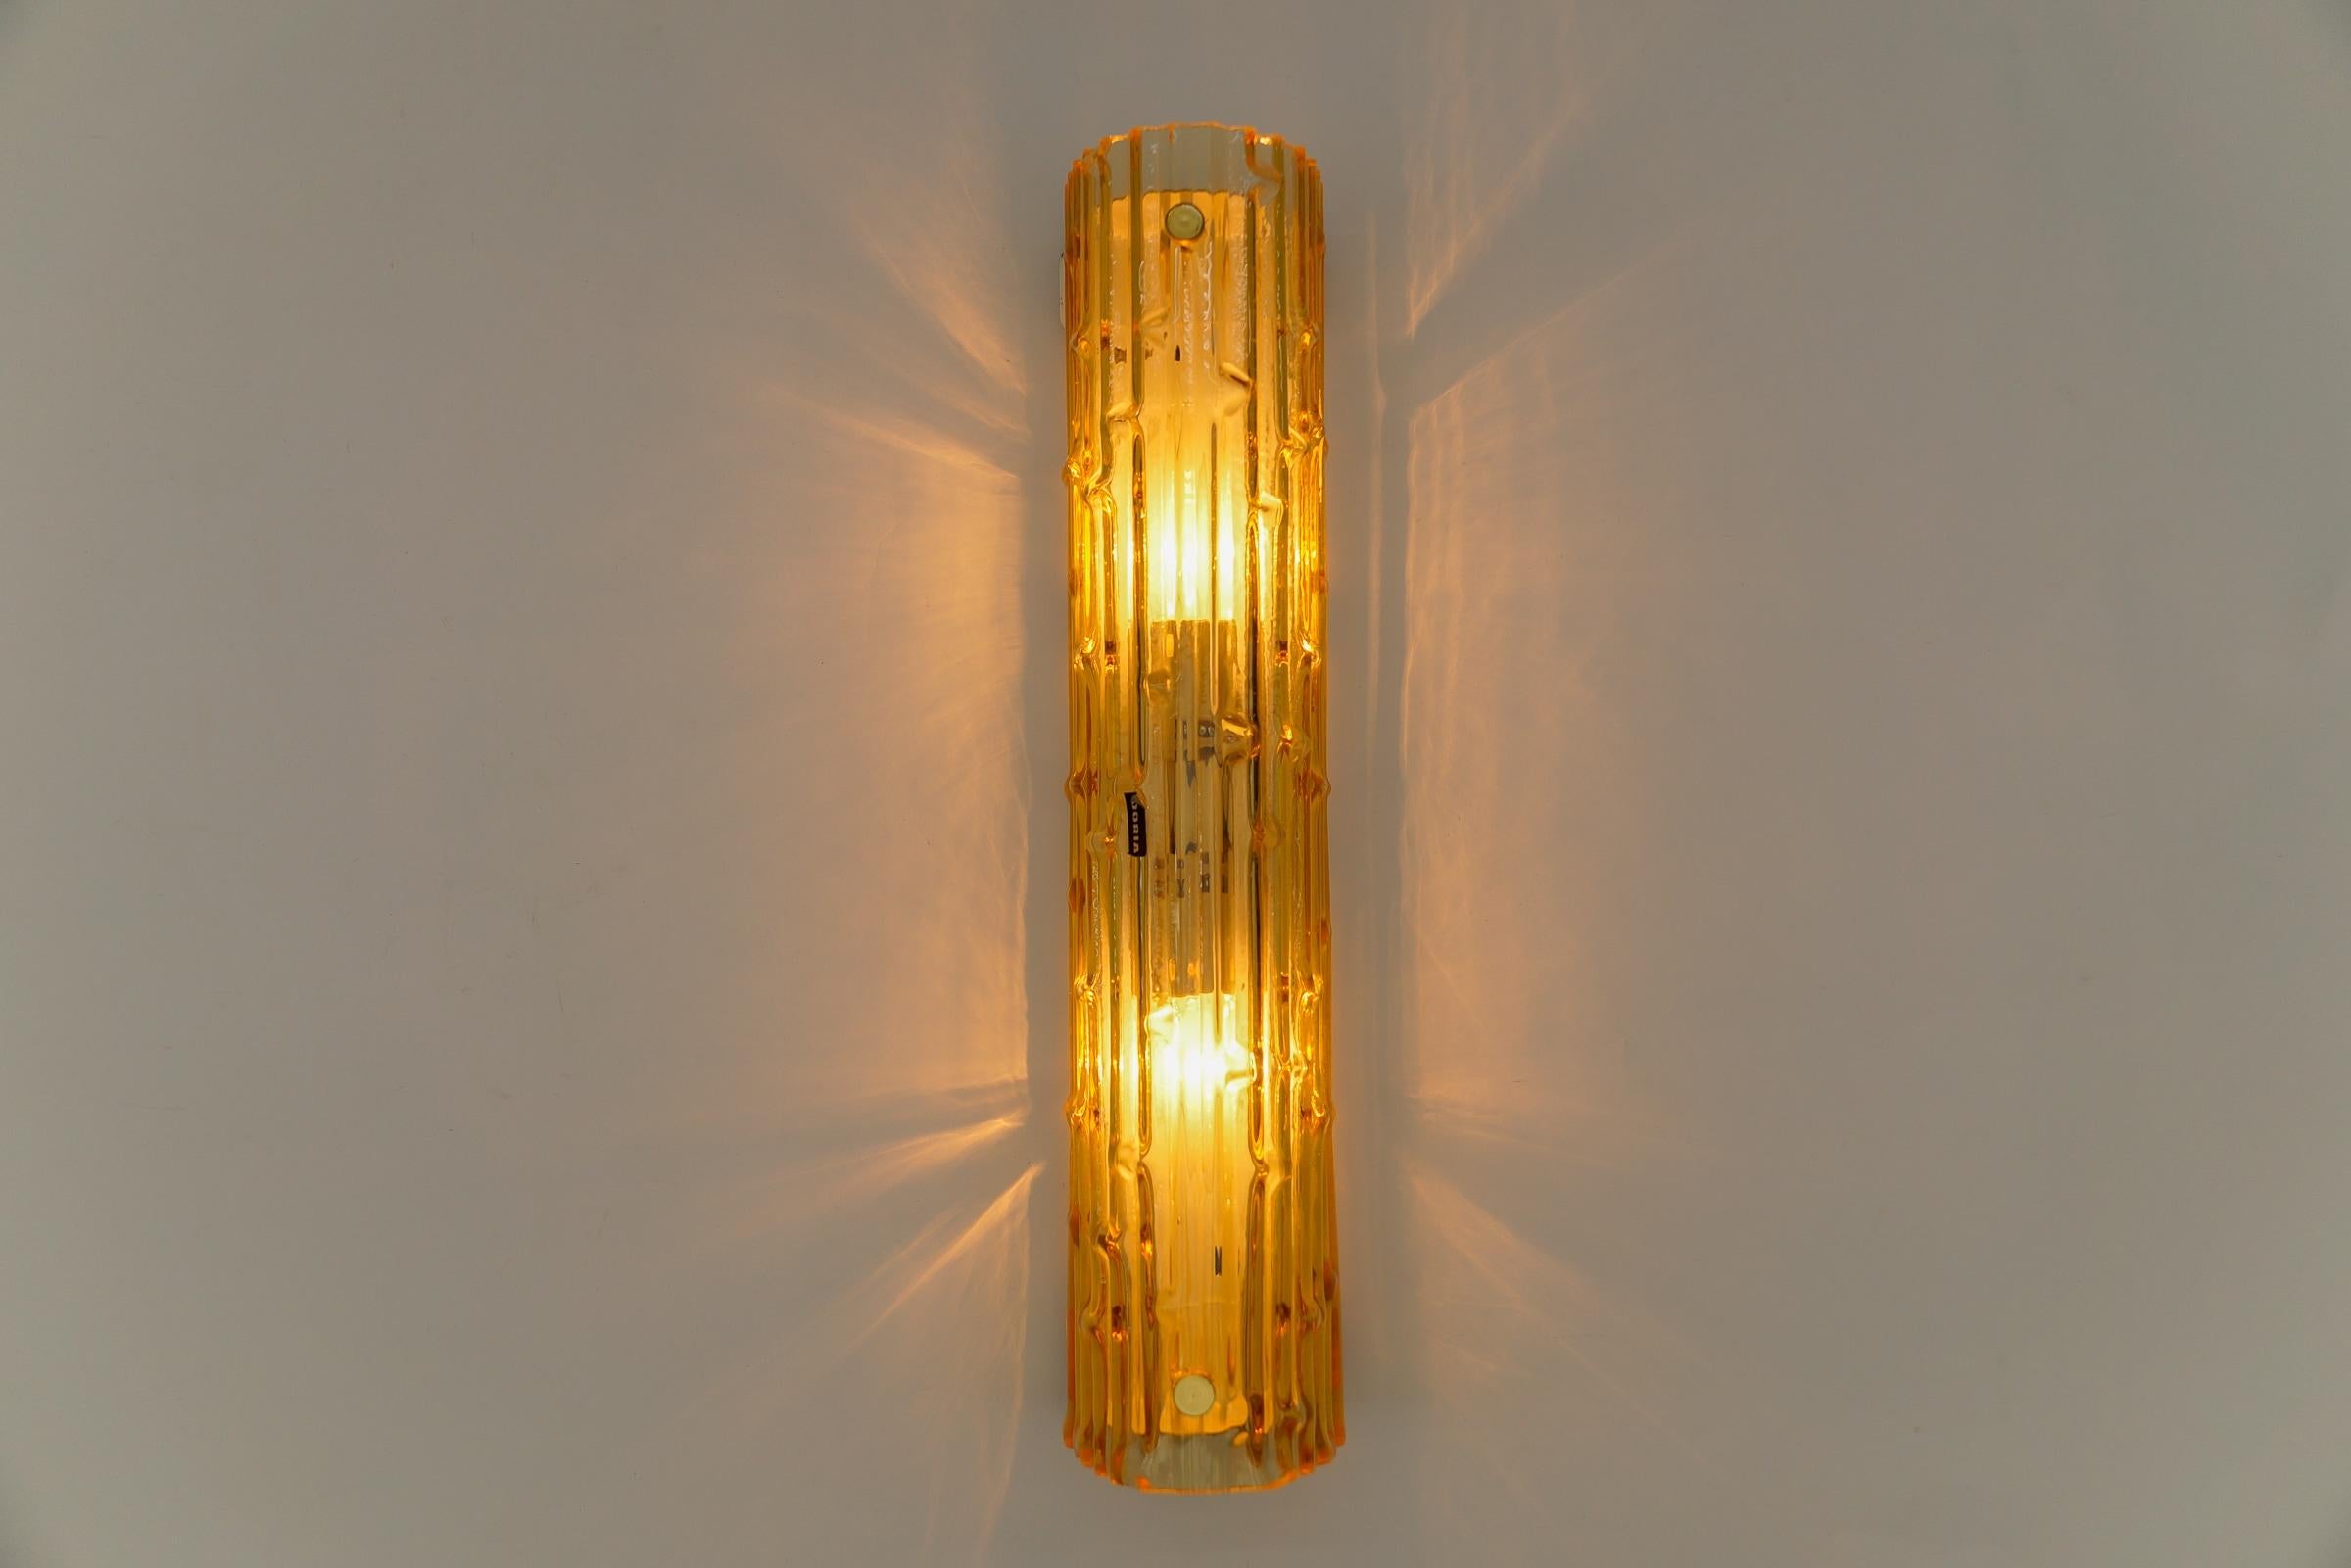 Lovely Yellow Tinted Structured Glass Sconce by Doria, 1960s Germany

The lamp comes with 2 x E14 / E15 Edison screw fit bulb holder, is wired and in working condition. It runs both on 110/230 Volt. Delivery without bulb.

Light bulbs are not